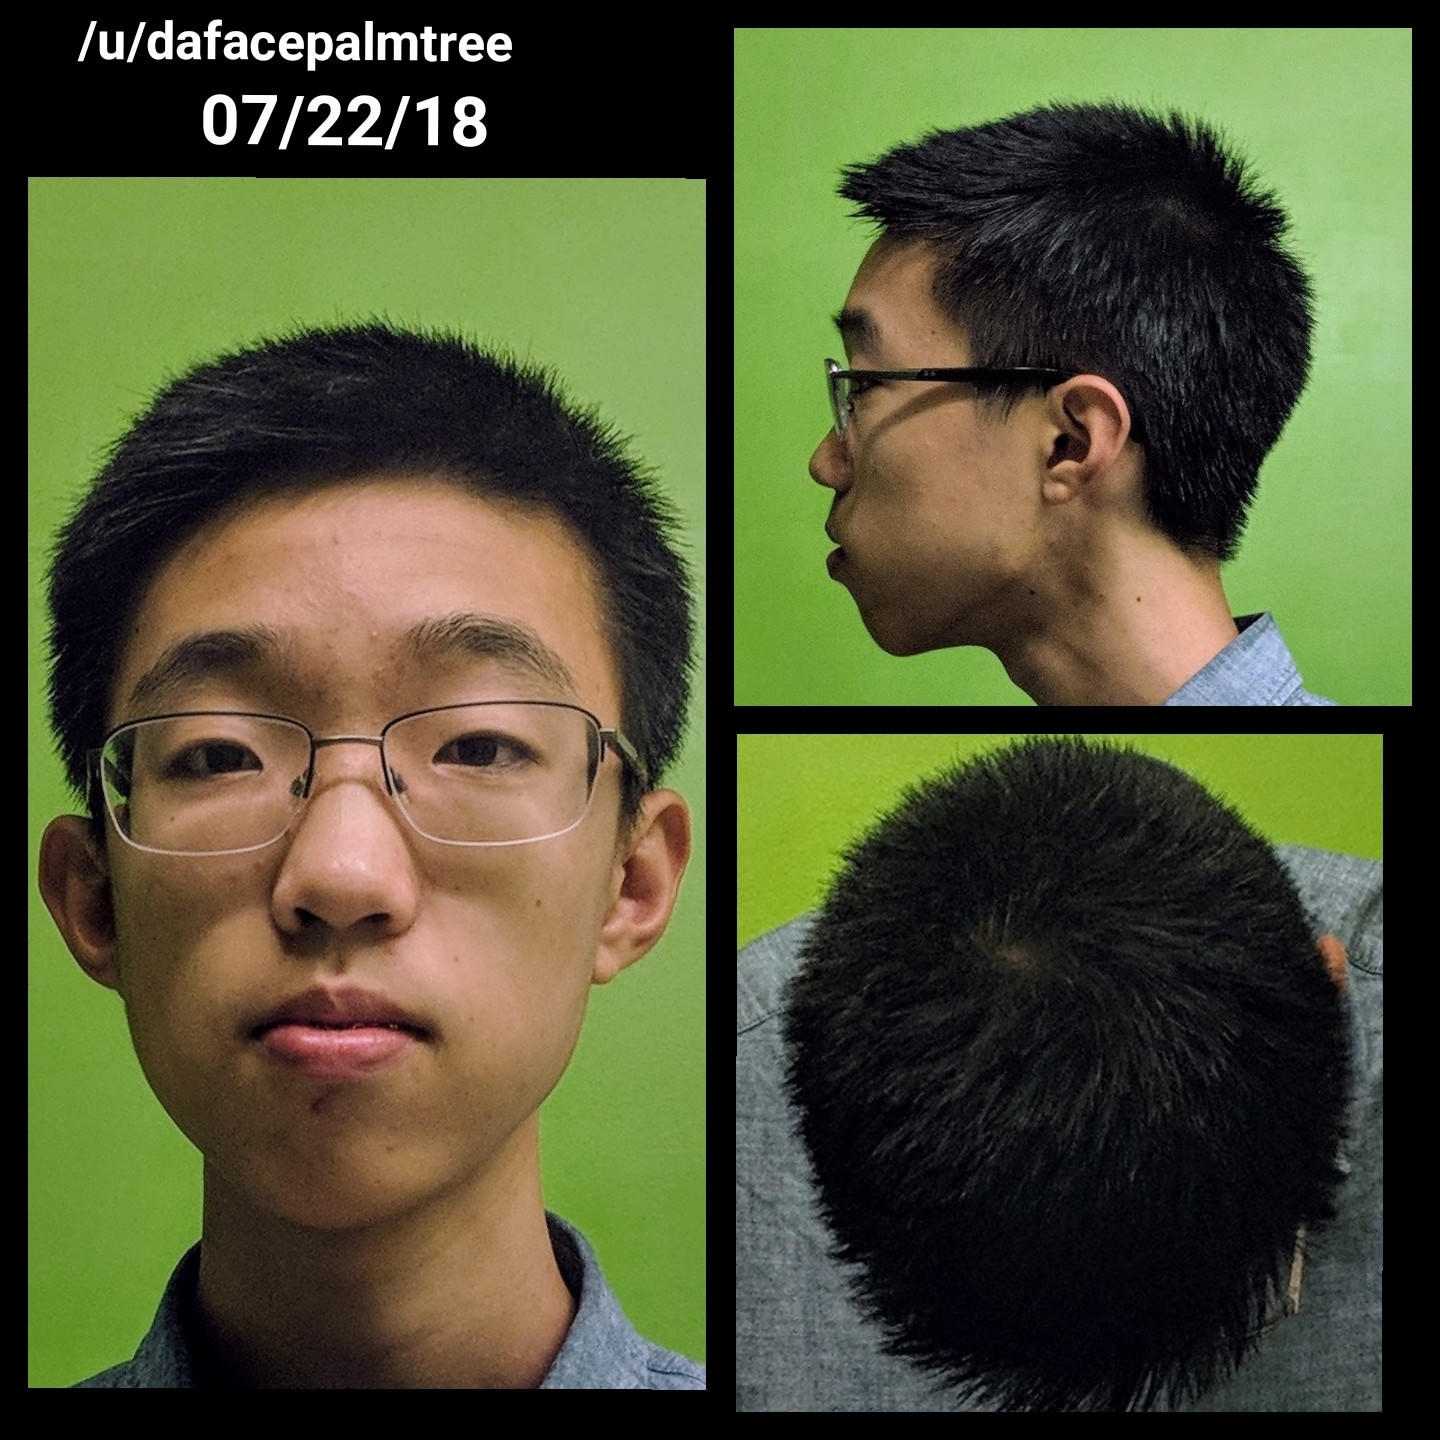 Hairstyle Advice For Straight, Thin Asian Hair Profile? : Malehairadvice pertaining to Top-drawer Asian Male Hairstyles For Thin Hair